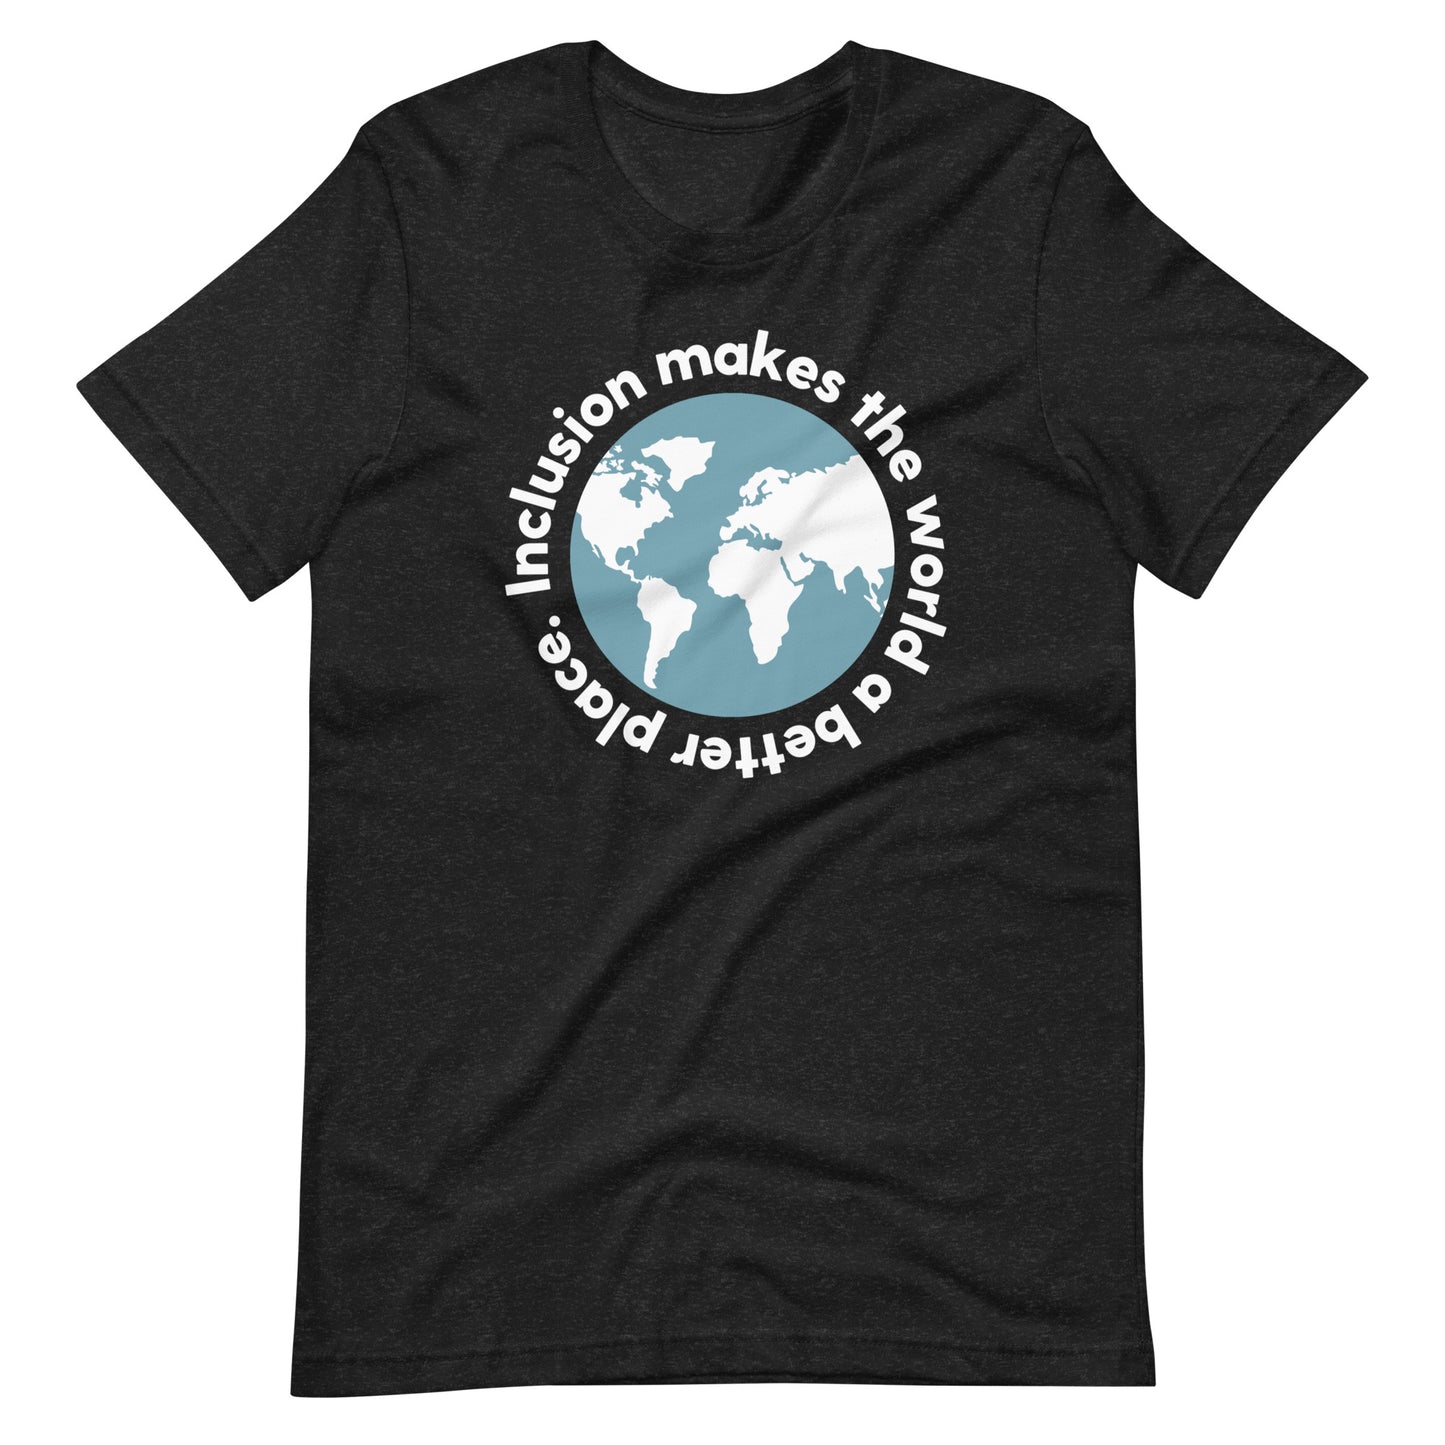 Inclusion Makes the World a Better Place | Adult Unisex Tee